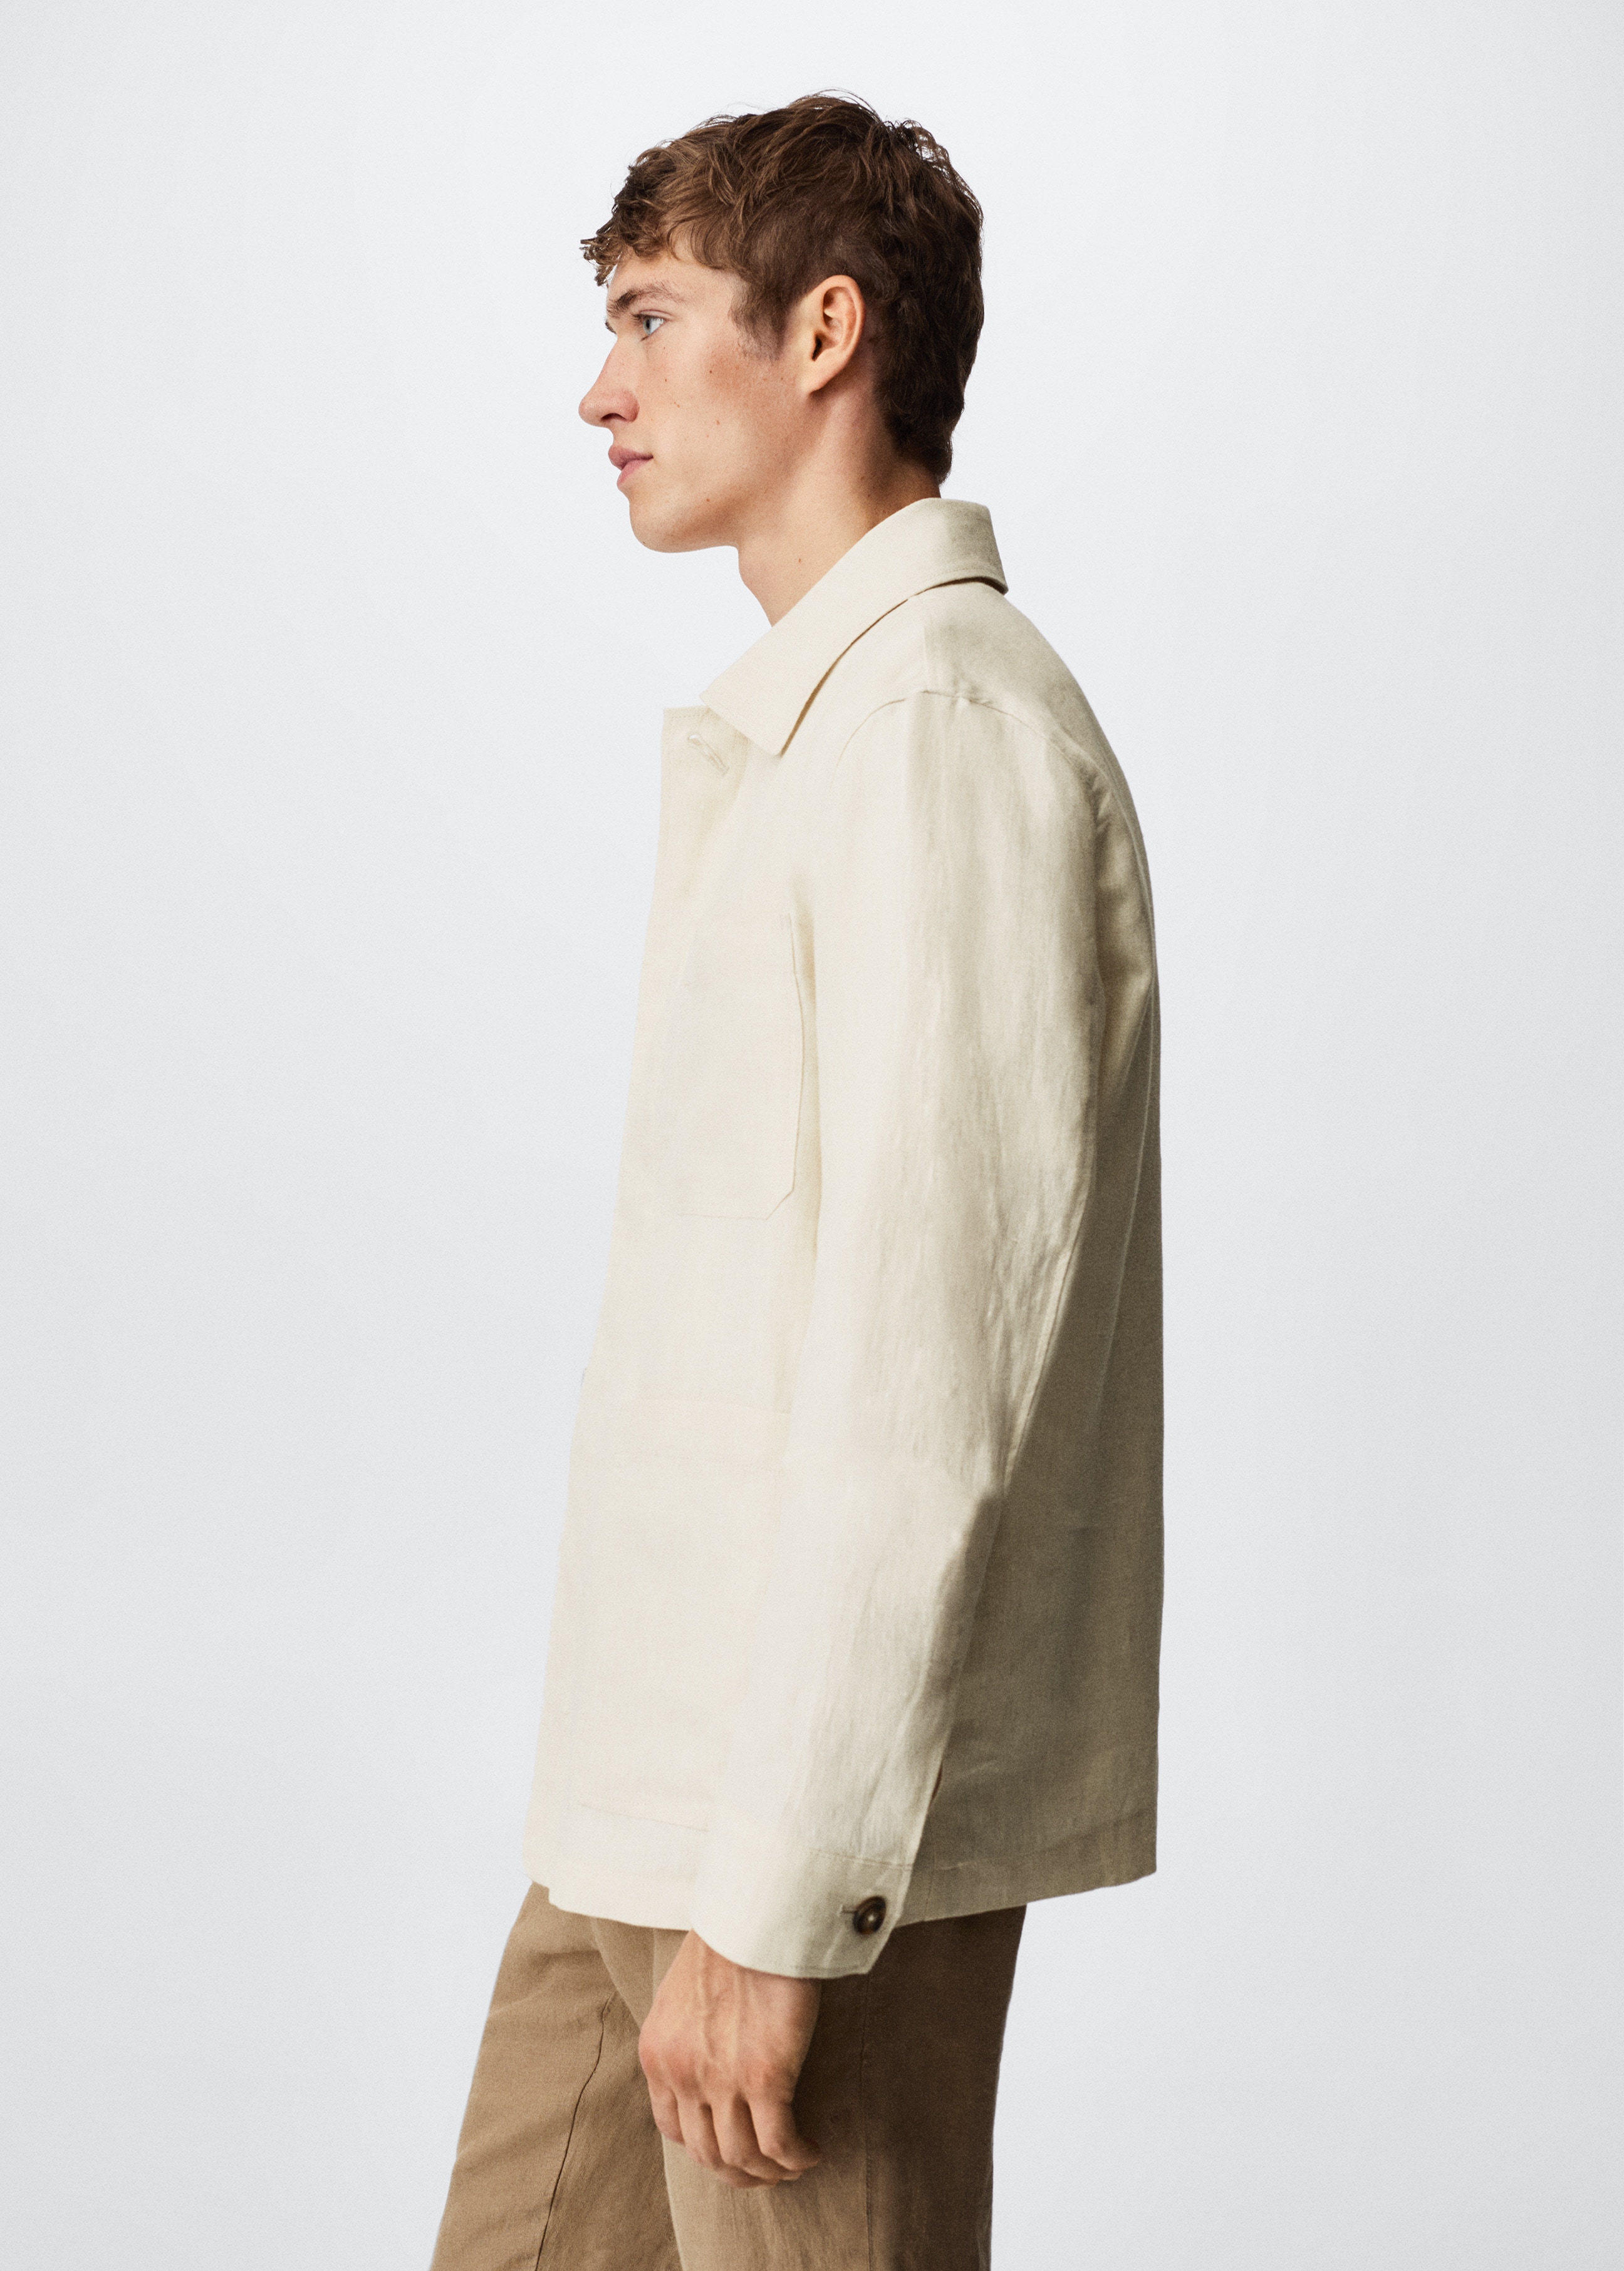 Linen worker jacket - Details of the article 3